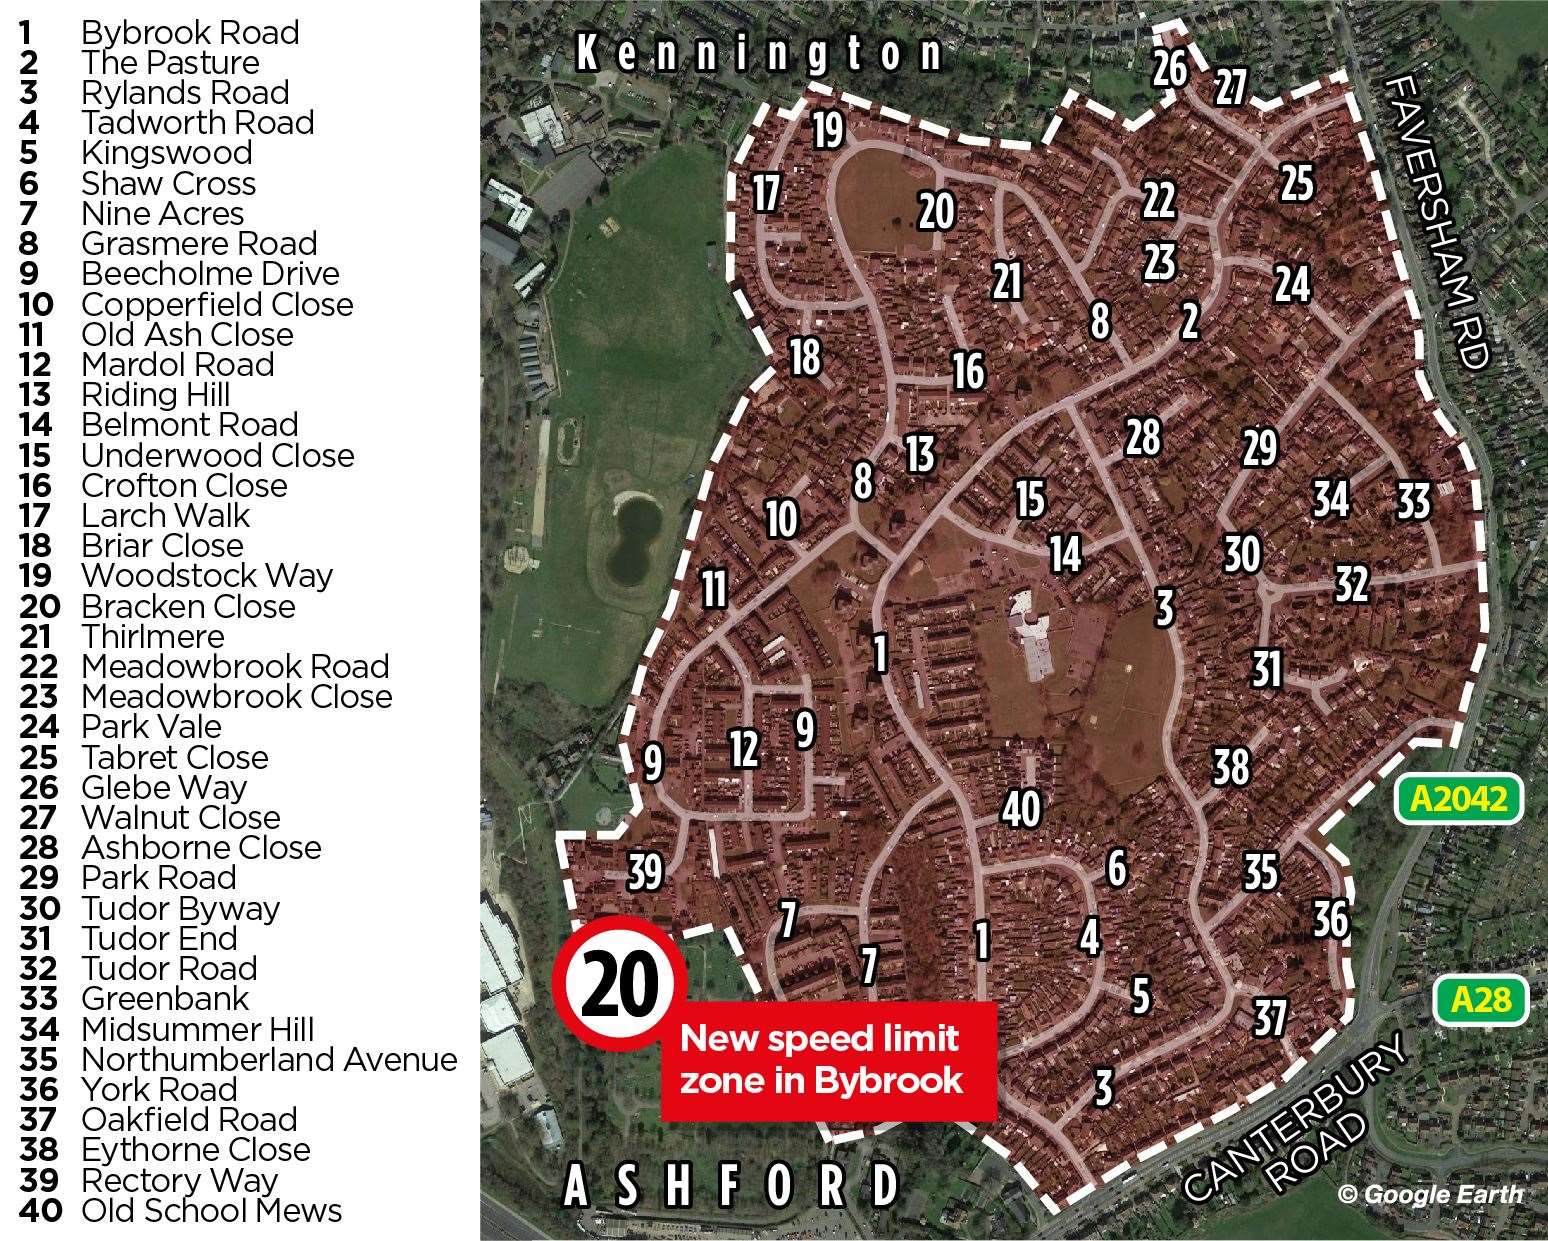 Speed limits have been lowered across 40 roads - but Faversham Road outside Towers School is not included